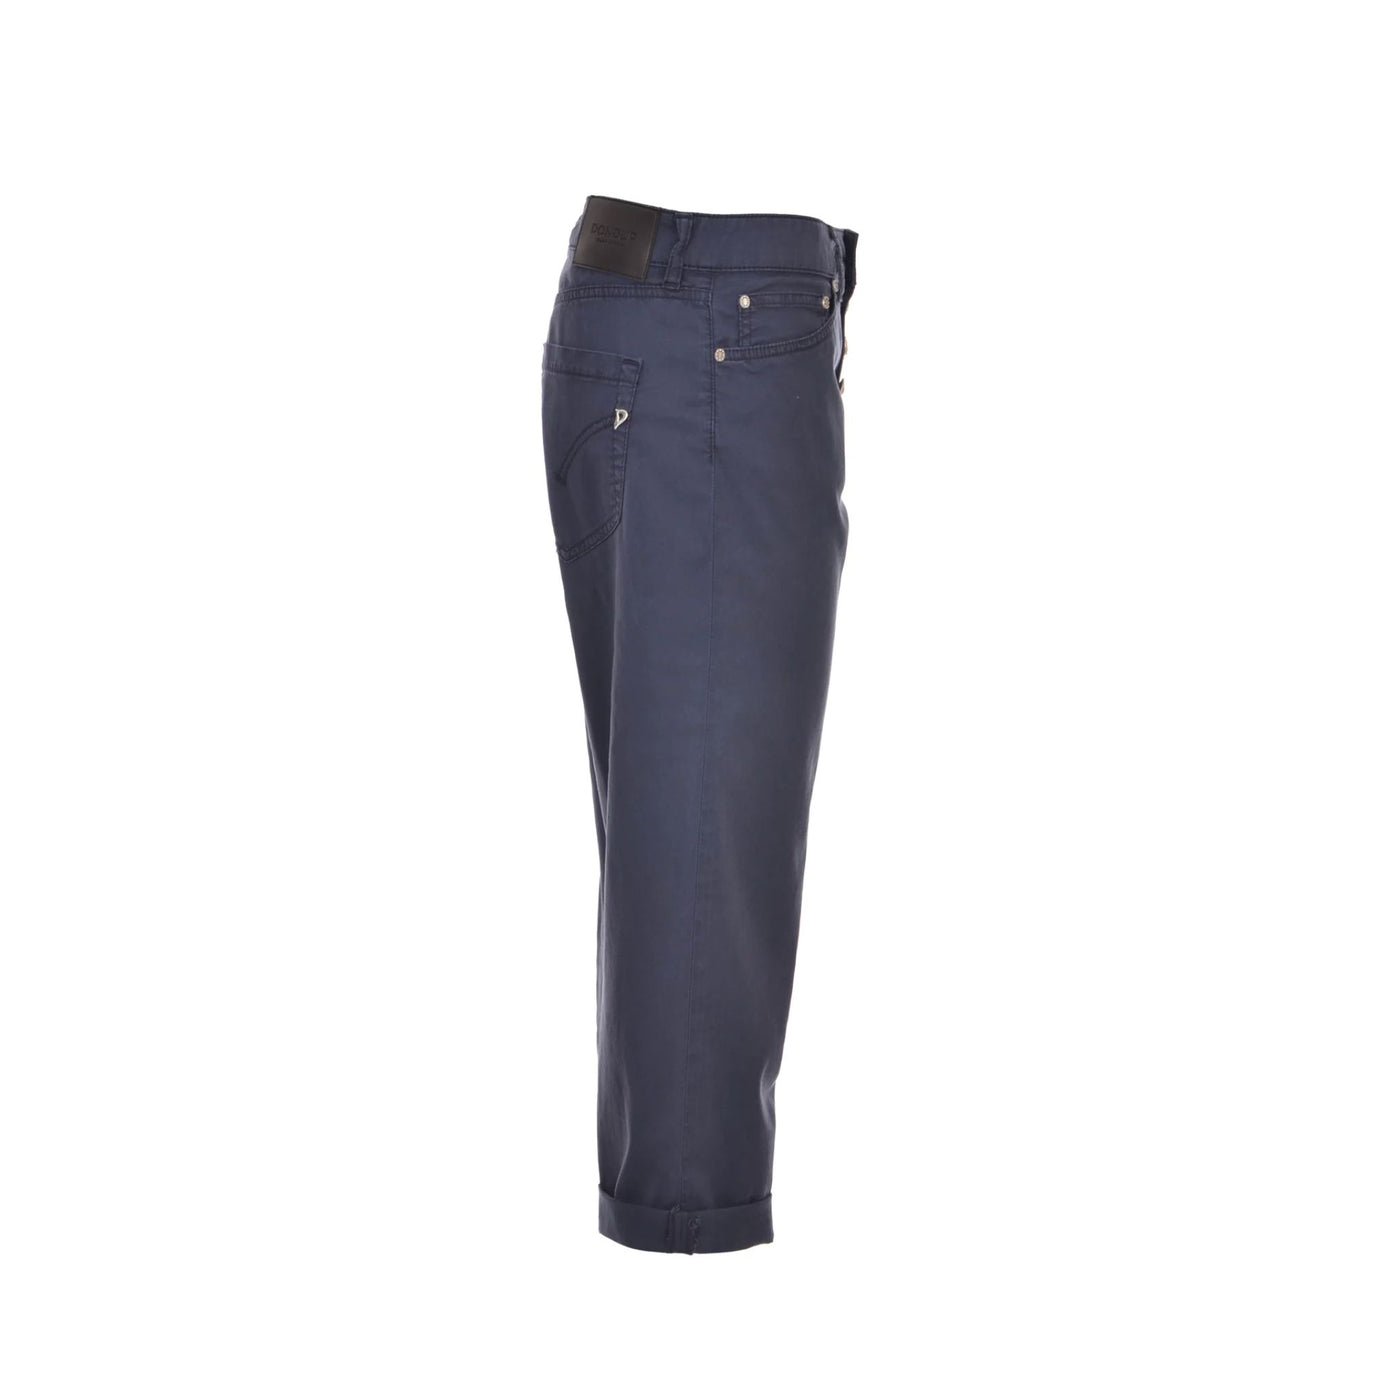 Women's trousers with jewel button